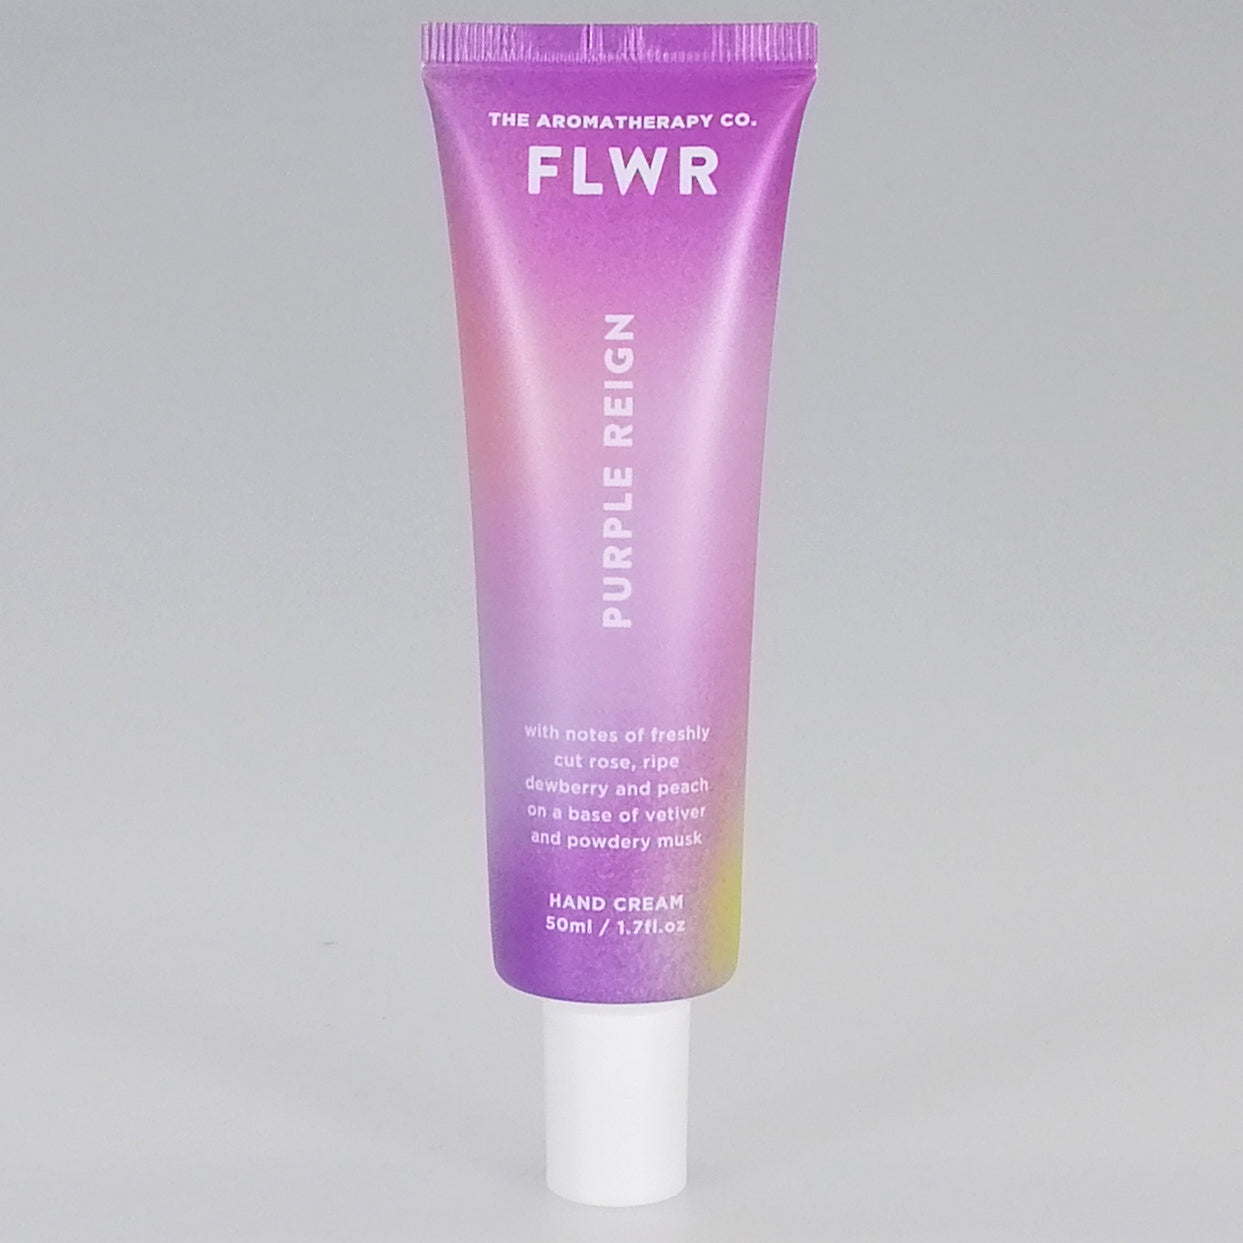 The Aromatherapy Co. FLWR Hand Cream - Purple Reign